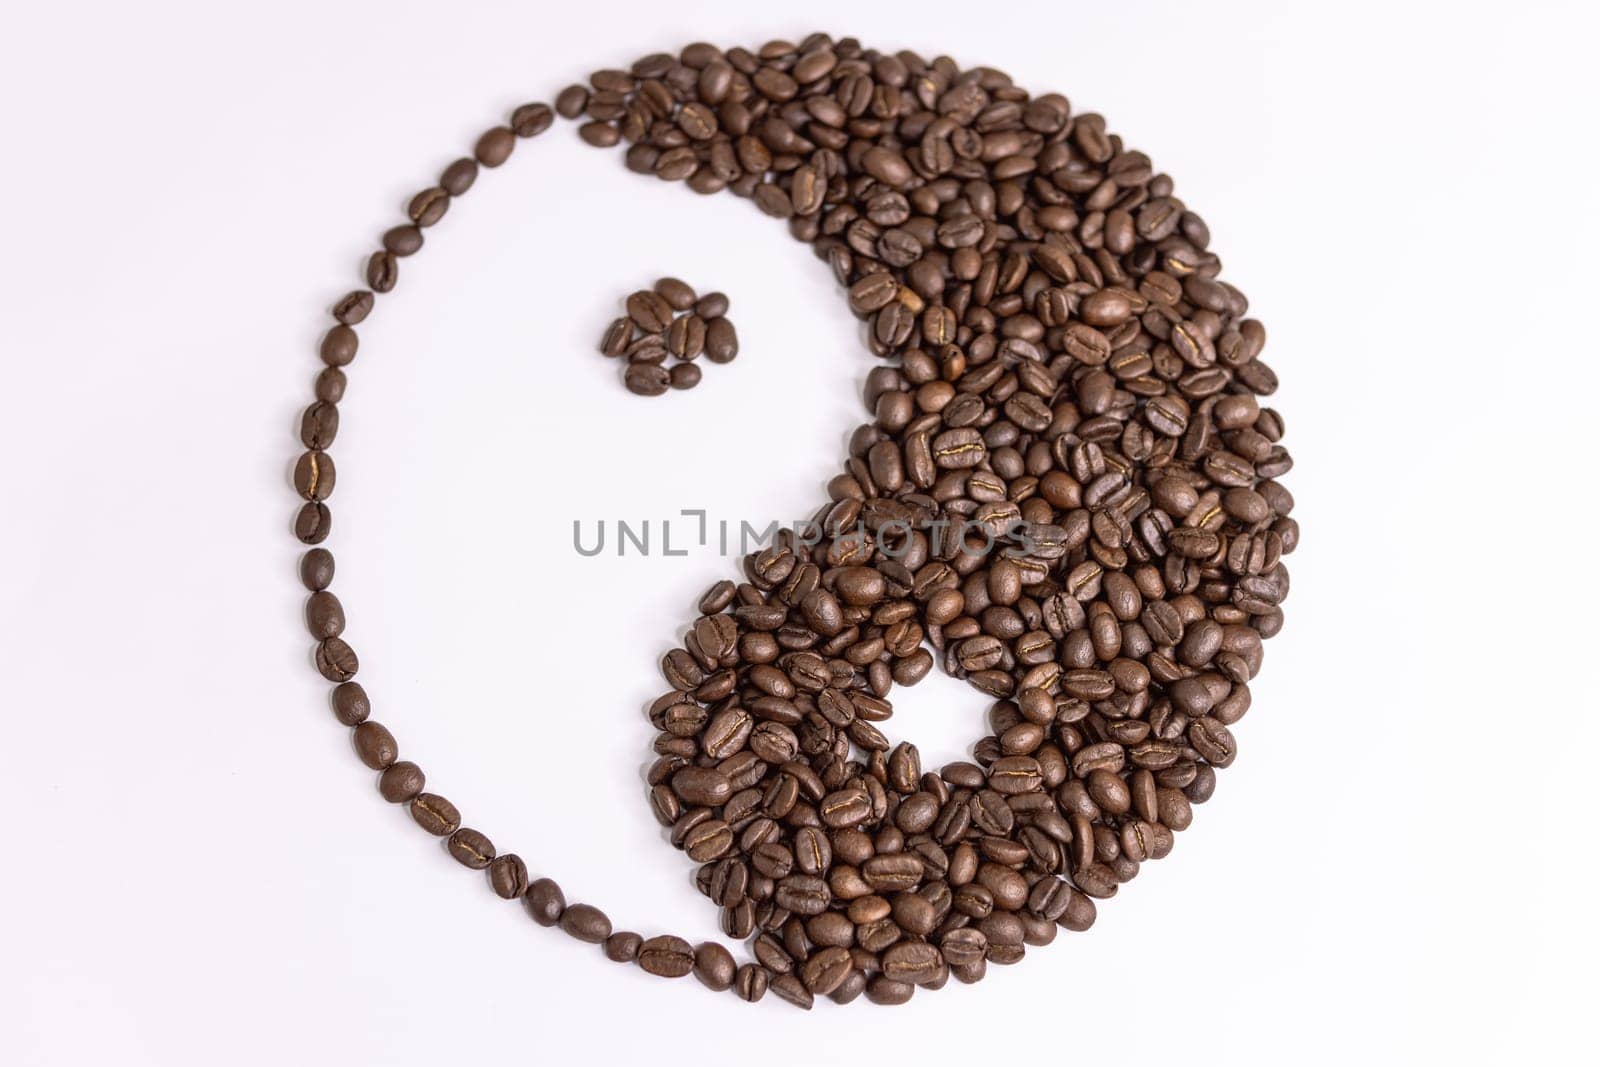 yin yang sign made by coffee beans on white background by PopOff